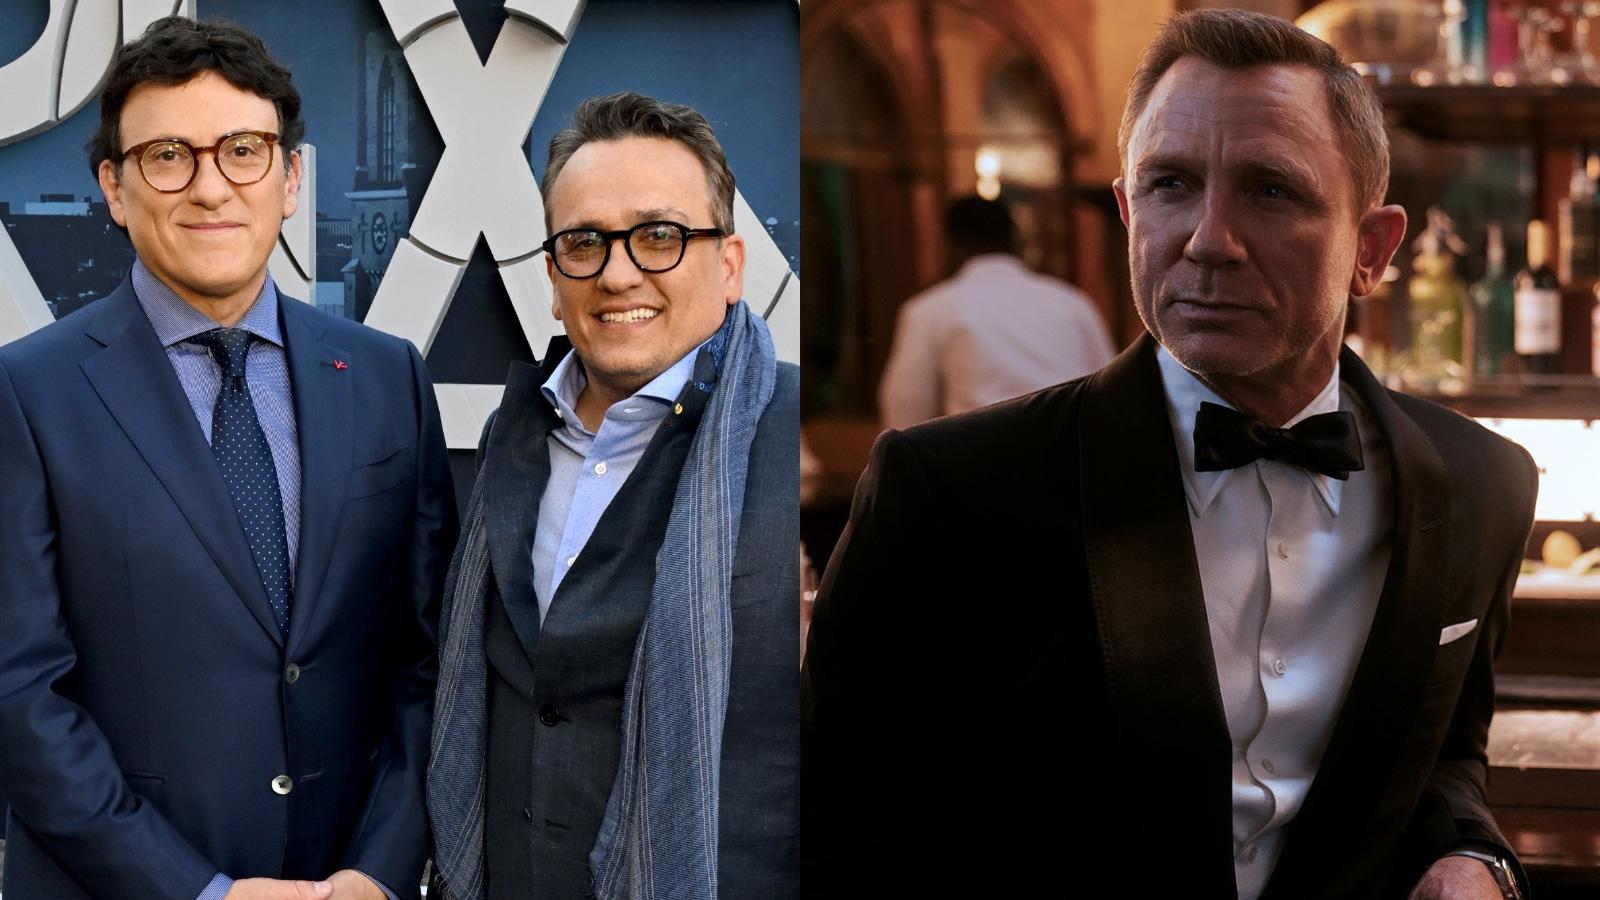 The Russo Brothers and Daniel Craig as James Bond